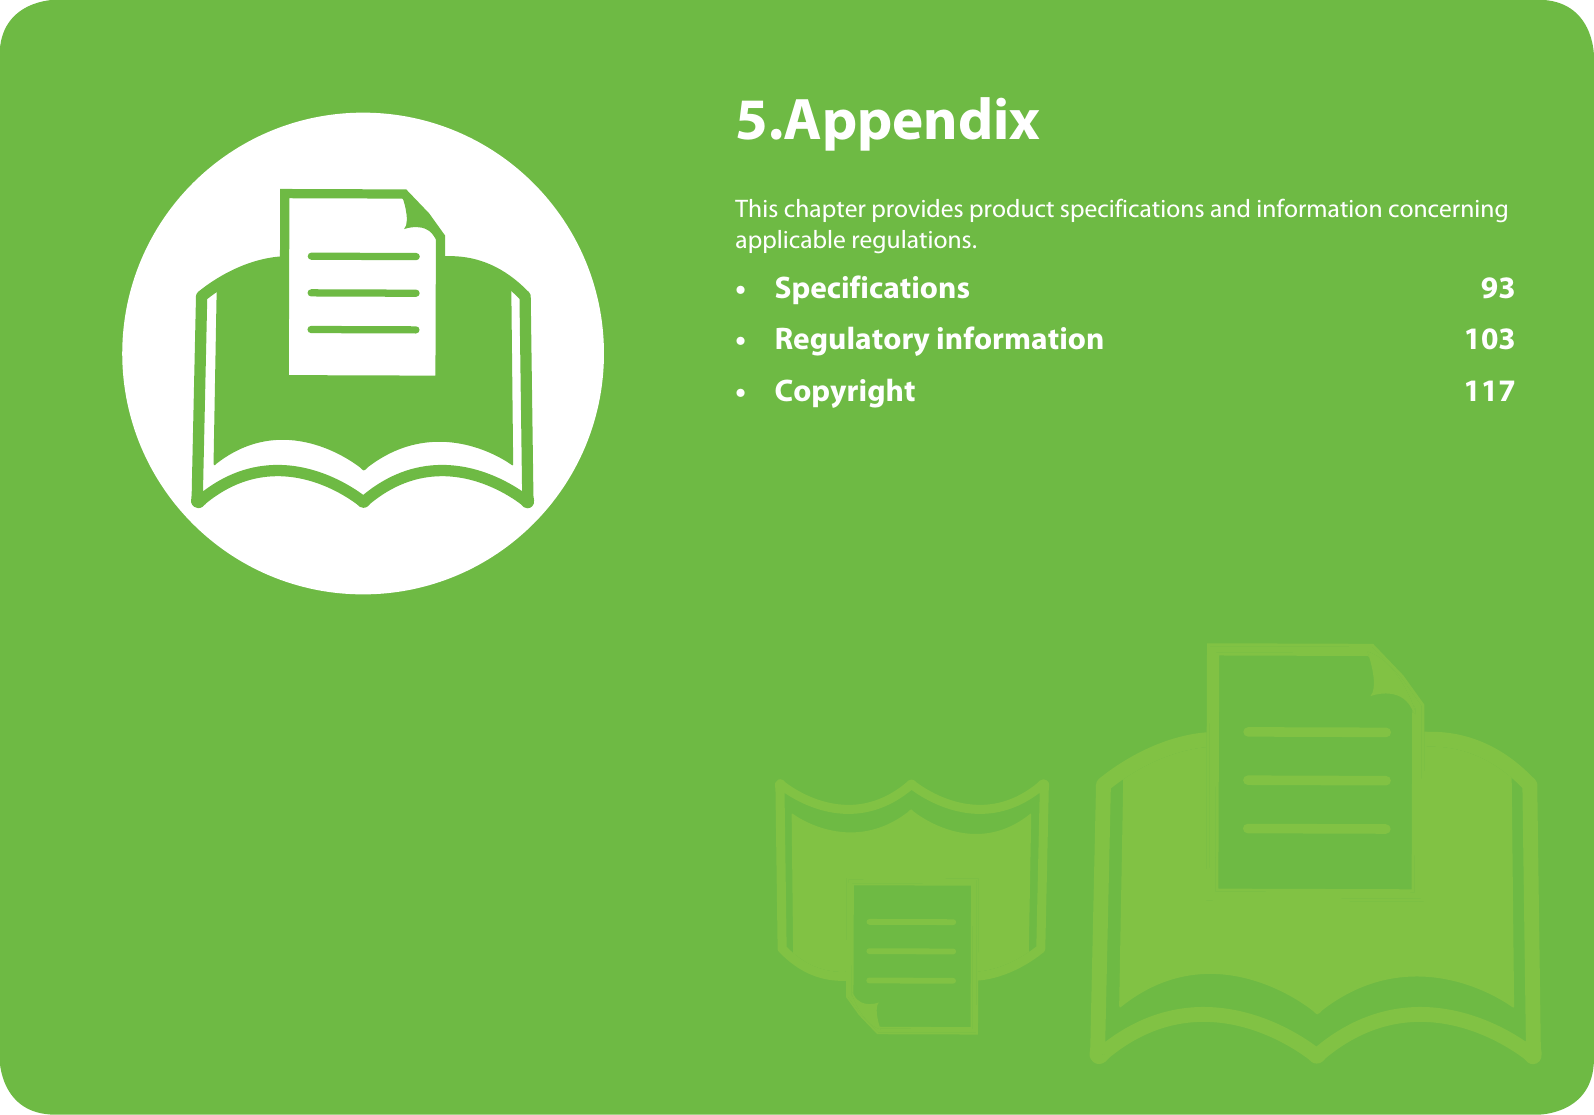 5.AppendixThis chapter provides product specifications and information concerning applicable regulations.•Specifications 93• Regulatory information 103• Copyright 117